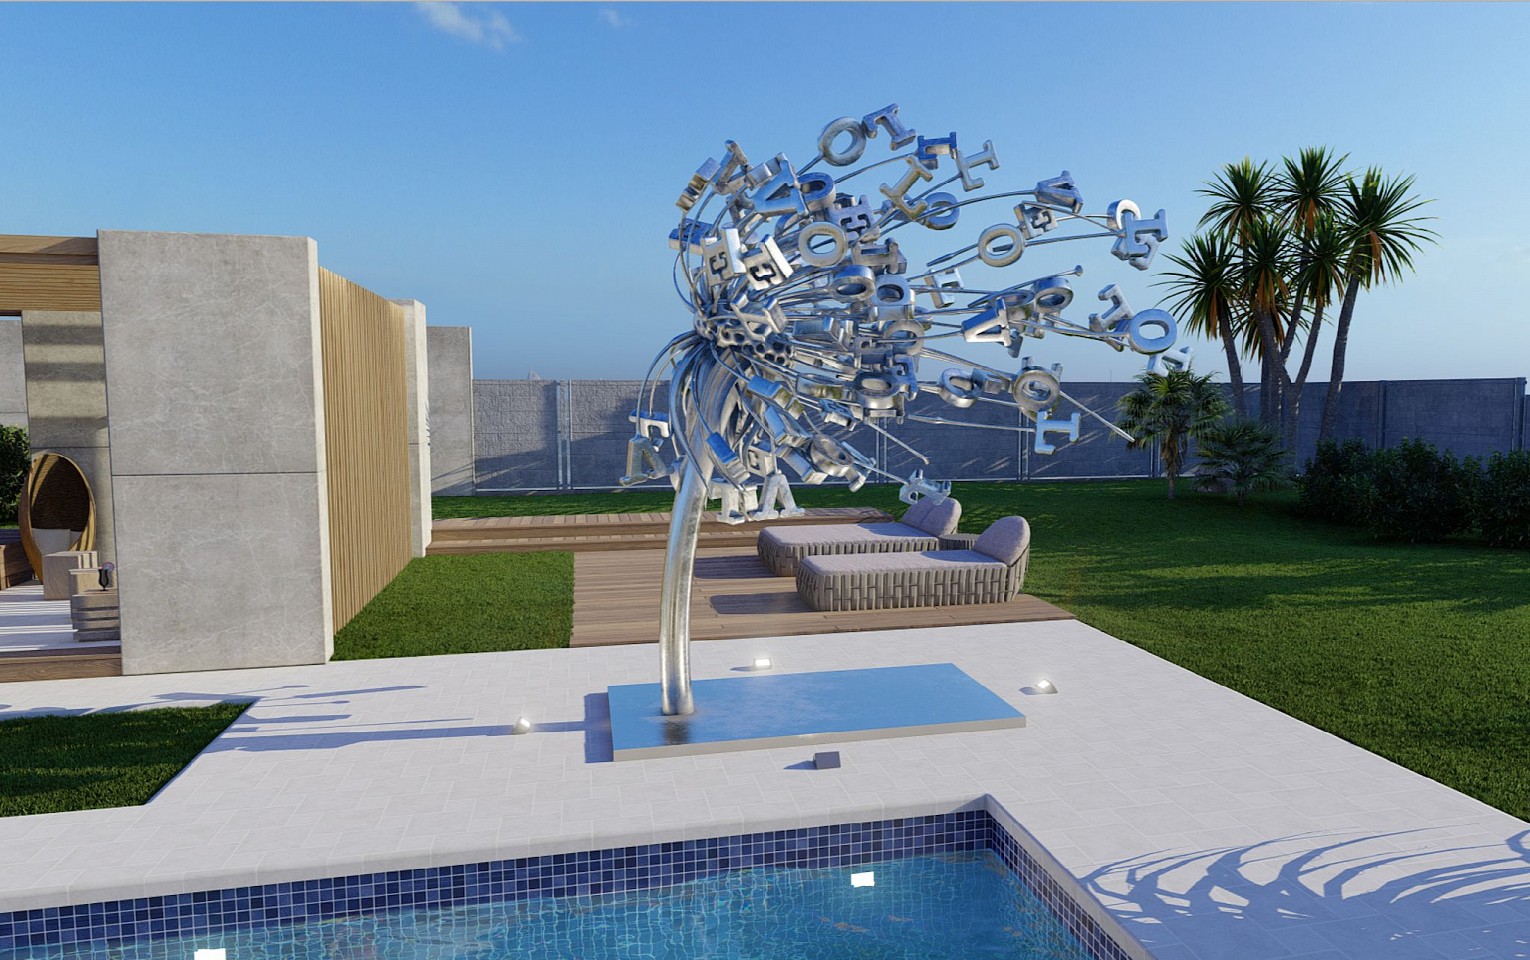 Alexi Torres, Love Is In The Air, 2022
316 Marine Grade Stainless Steel Sculpture, 72 x 80 x 48 in.